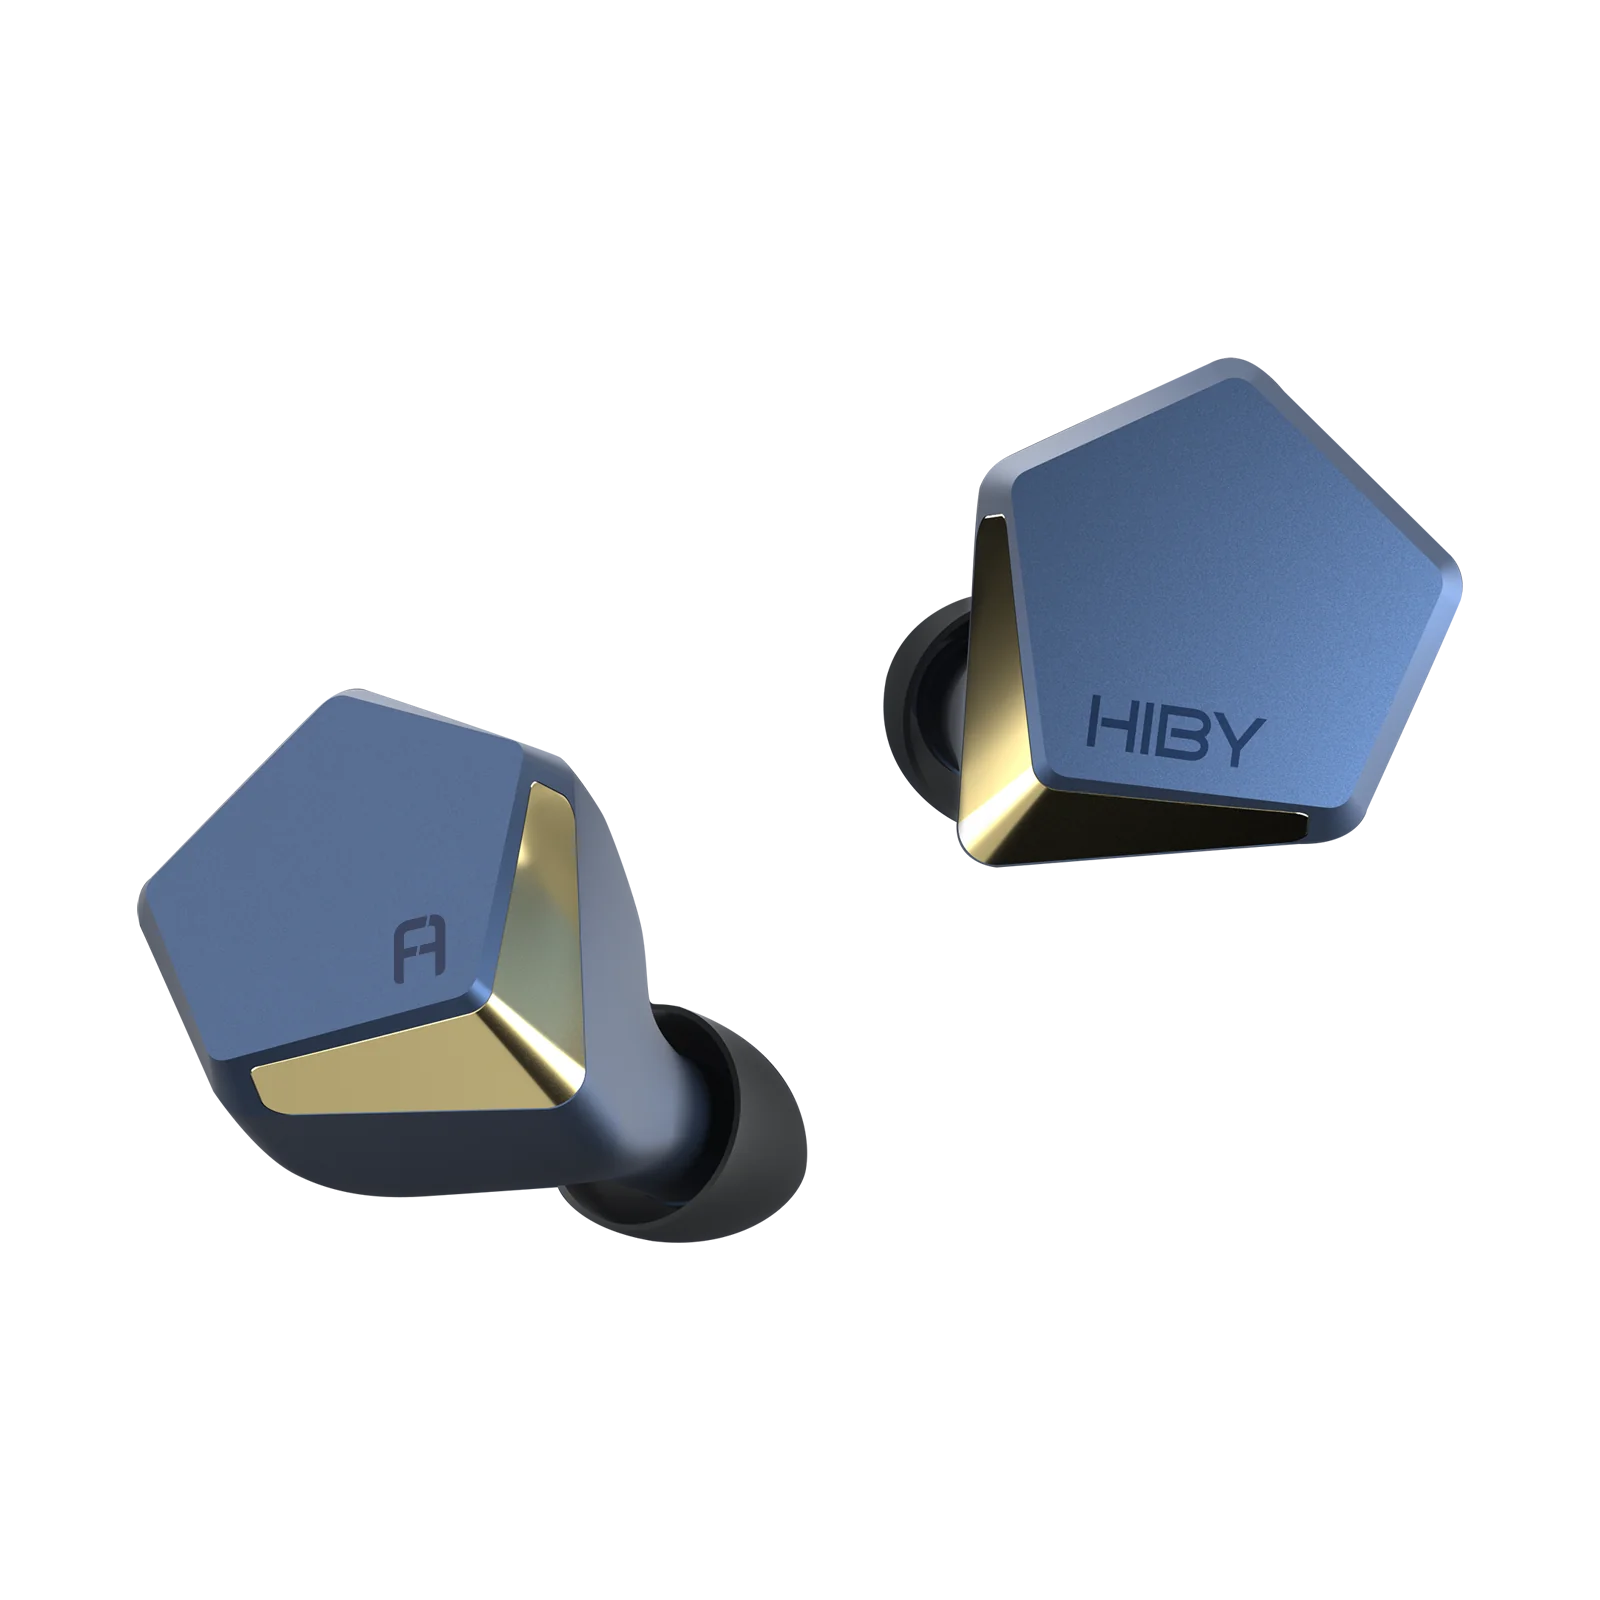 HiBy X Faudio Project Ace IEM